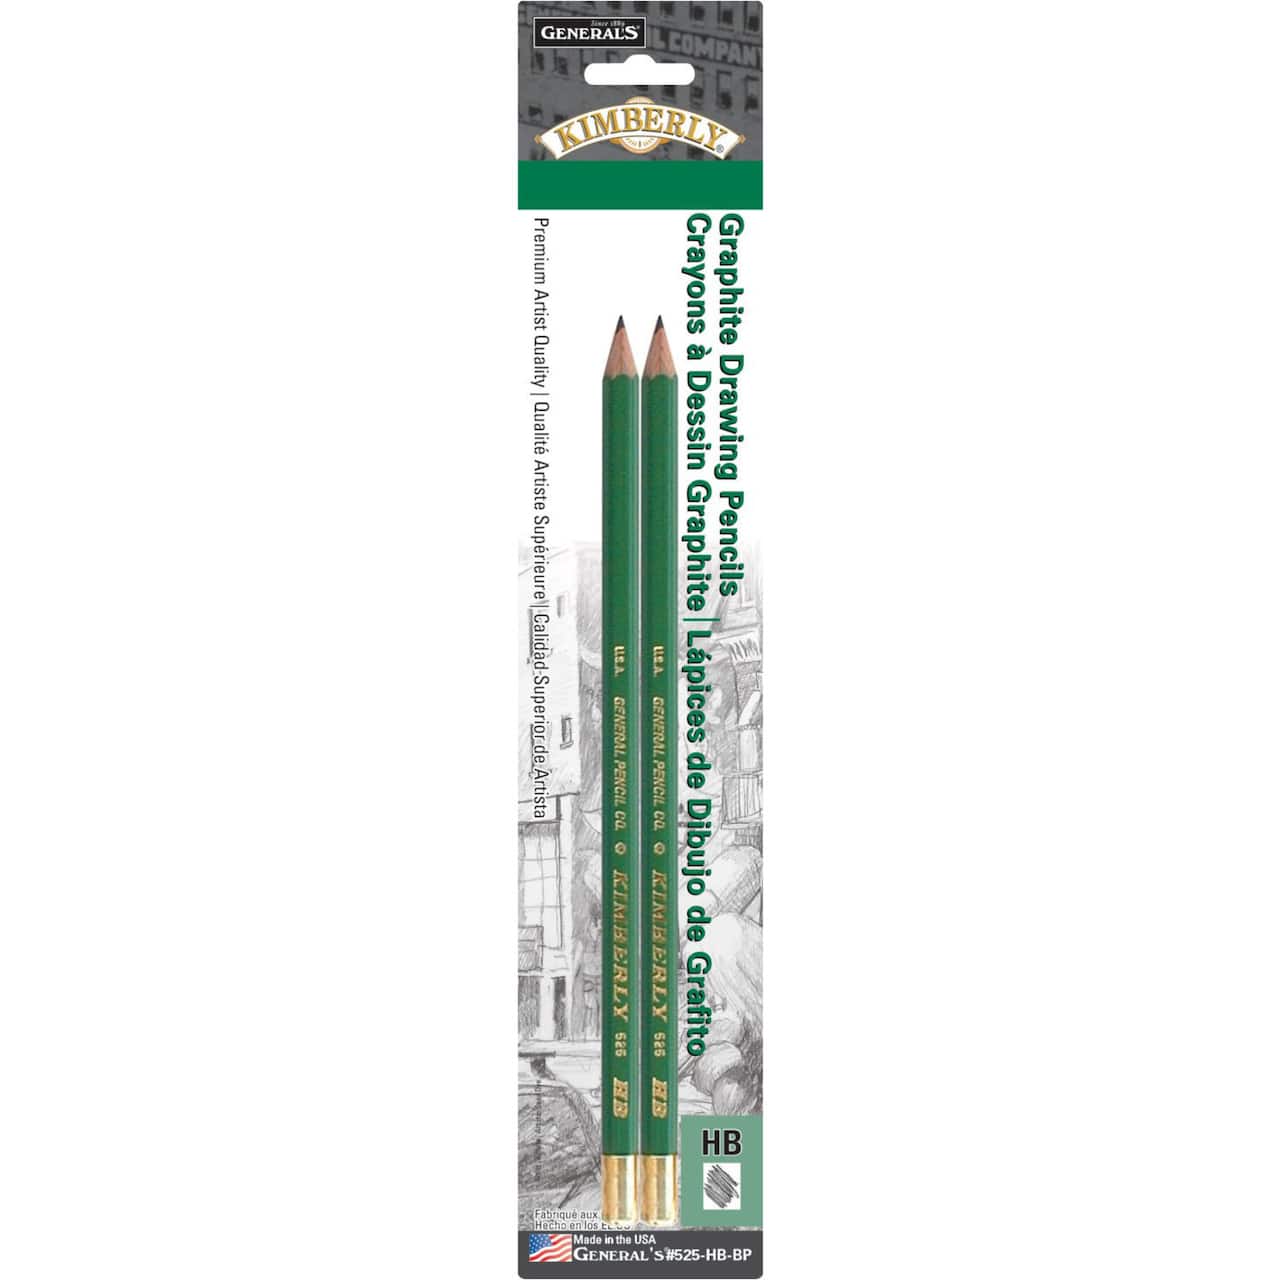 24 Packs: 2 ct. (48 total) General's® Kimberly® Graphite Drawing Pencil Set